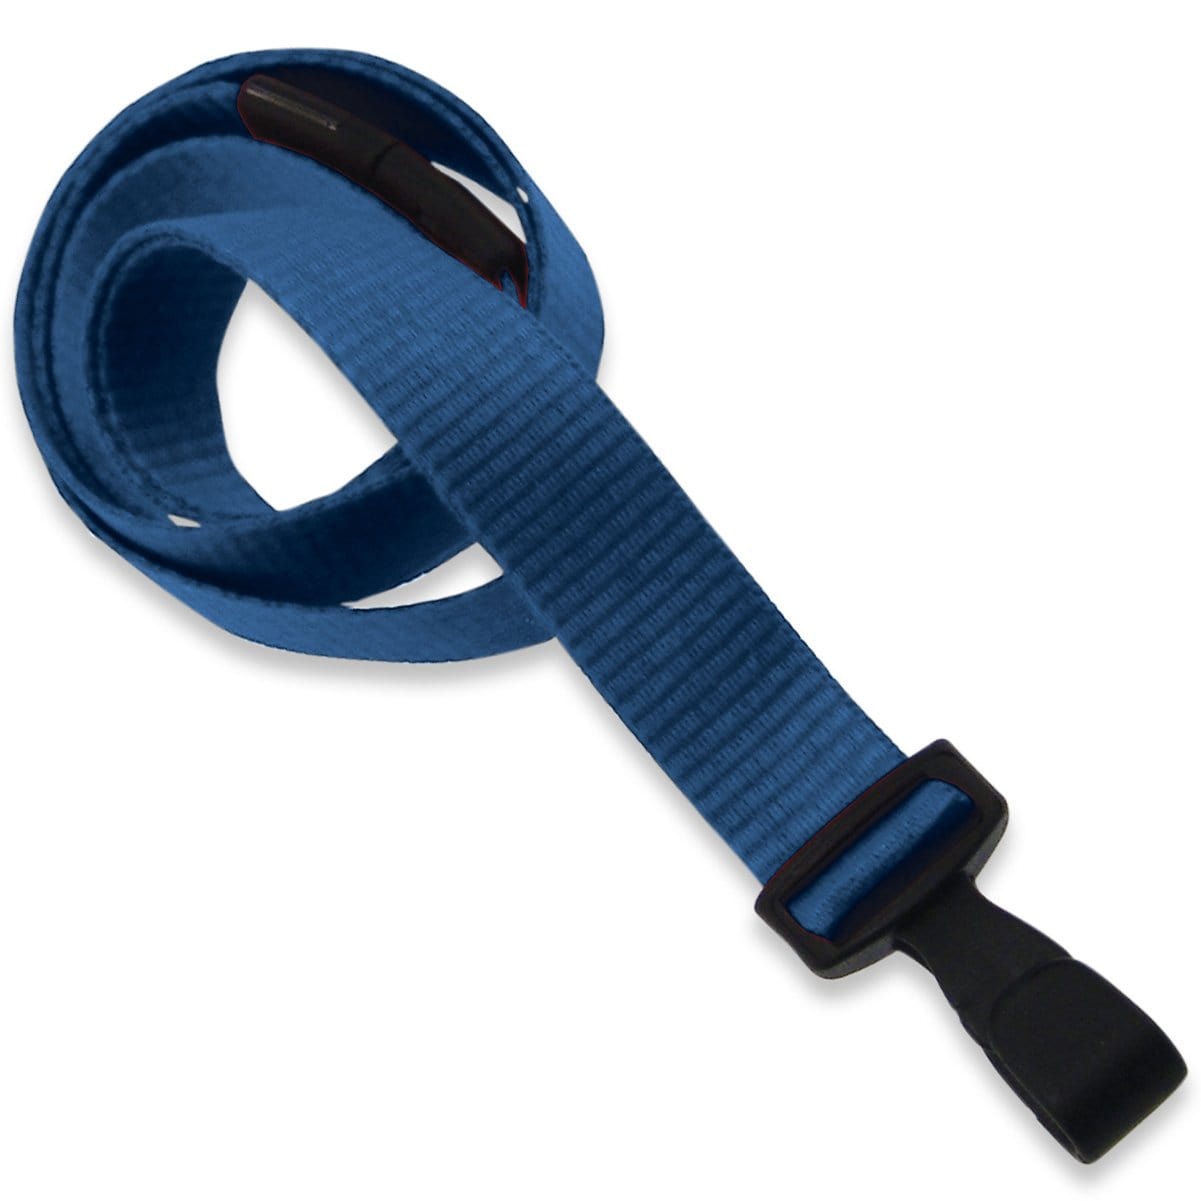 Royal Blue Antimicrobial 5/8 Inch Lanyard with Breakaway Clasp & No-Twist Plastic Hook (2136-340X) 2136-3406